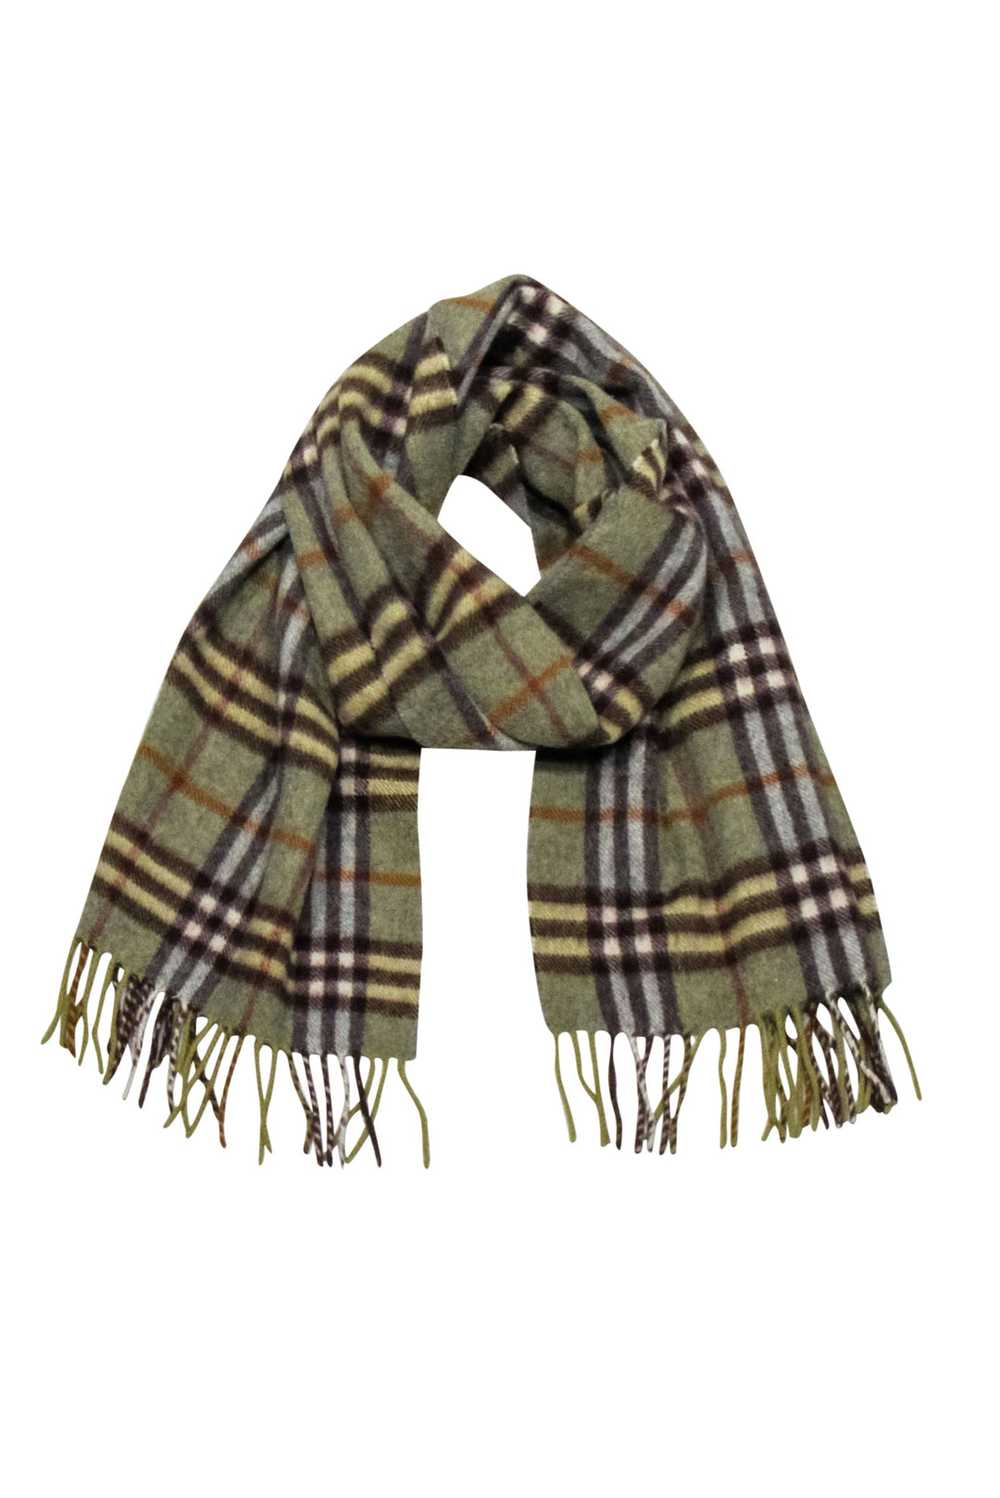 Burberry - Green & Brown Plaid Cashmere Scarf - image 3